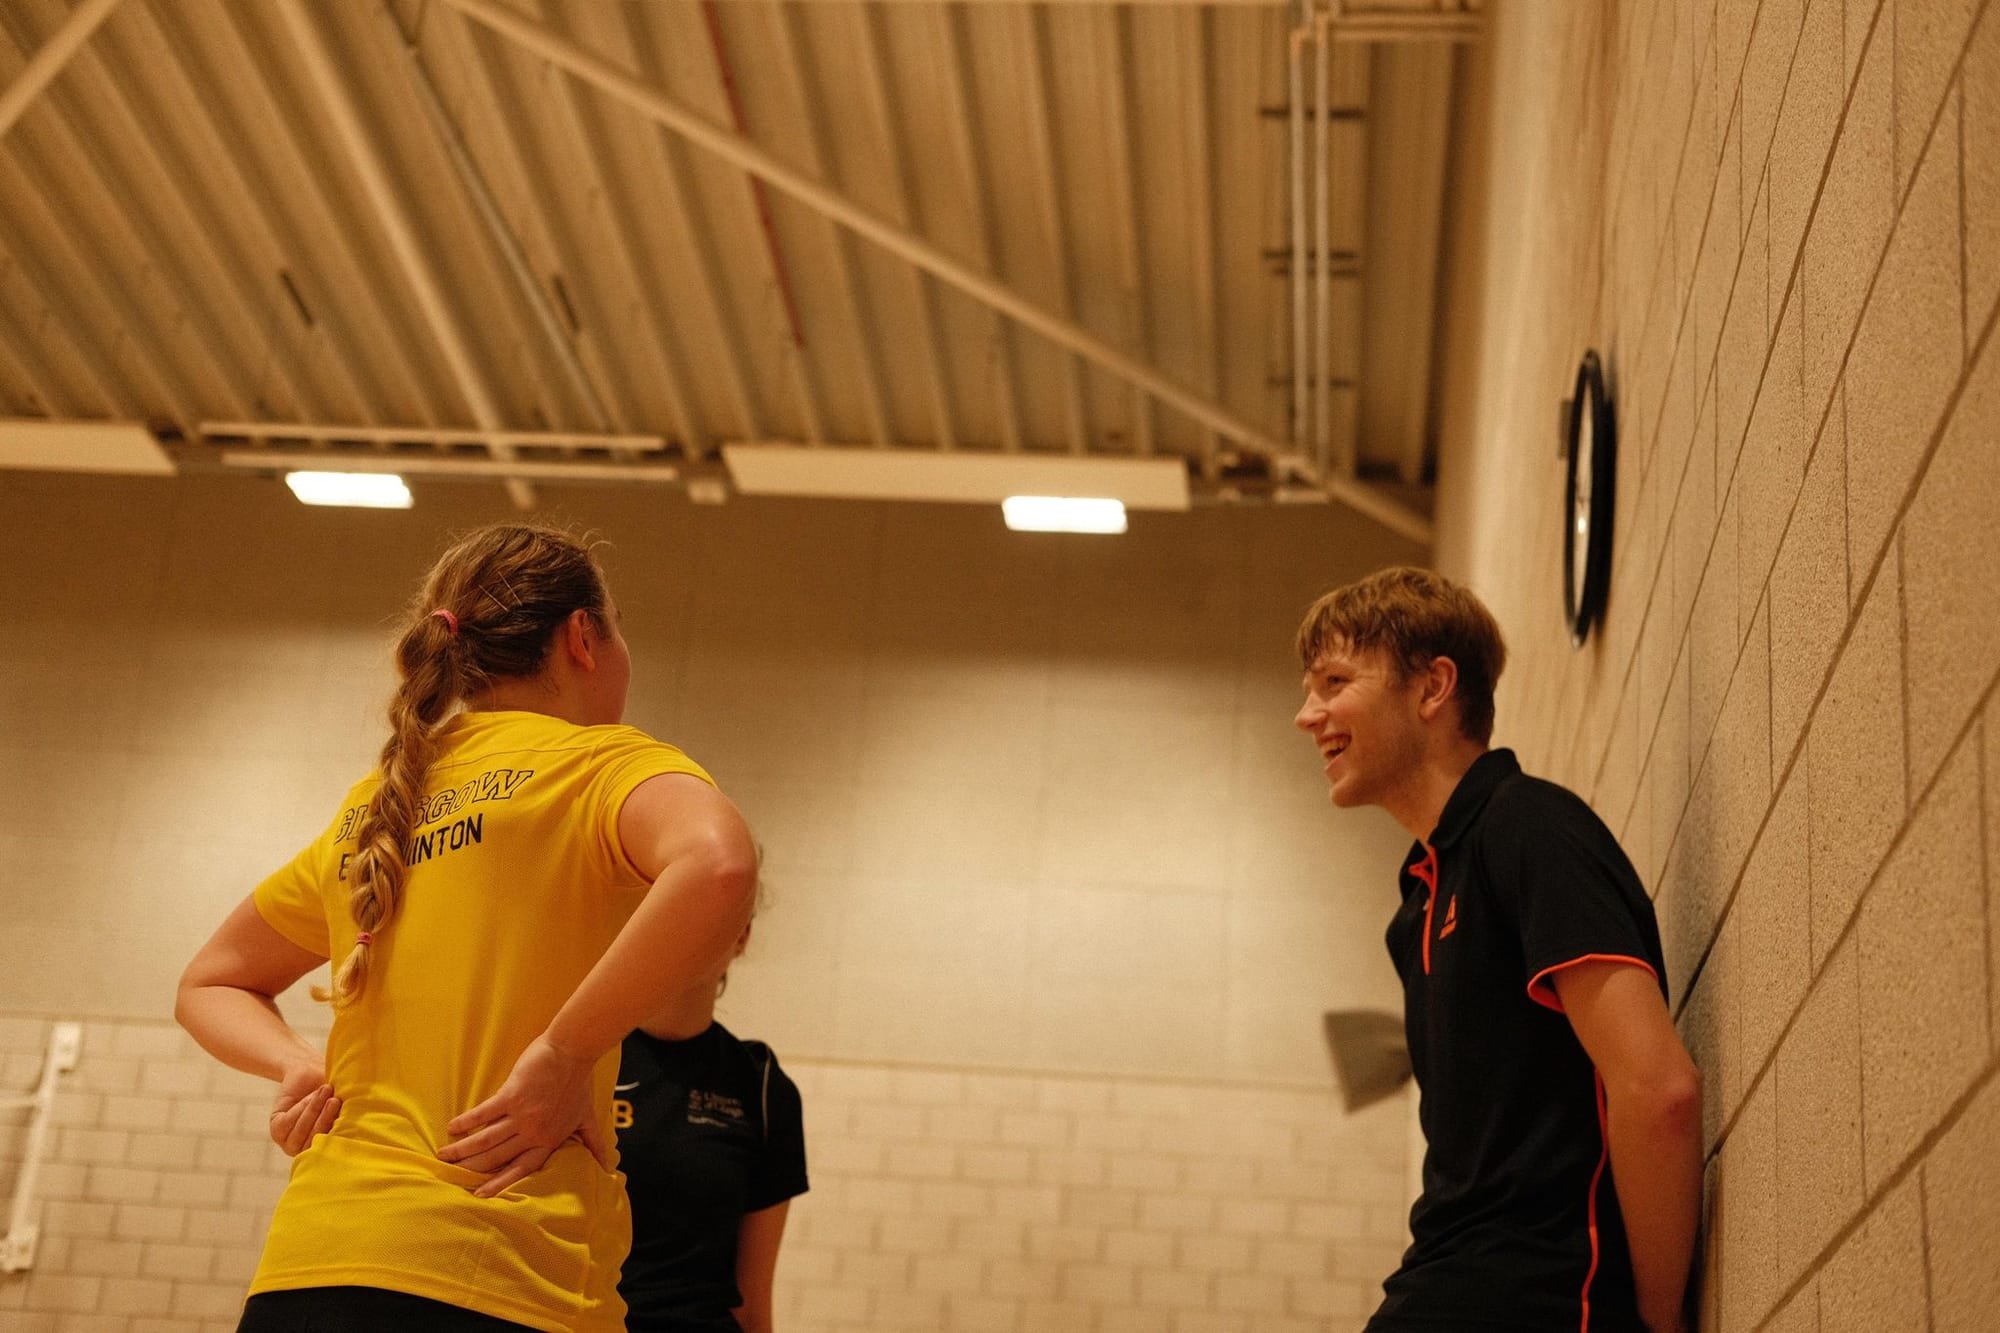 How badminton has helped me deal with the realities of life